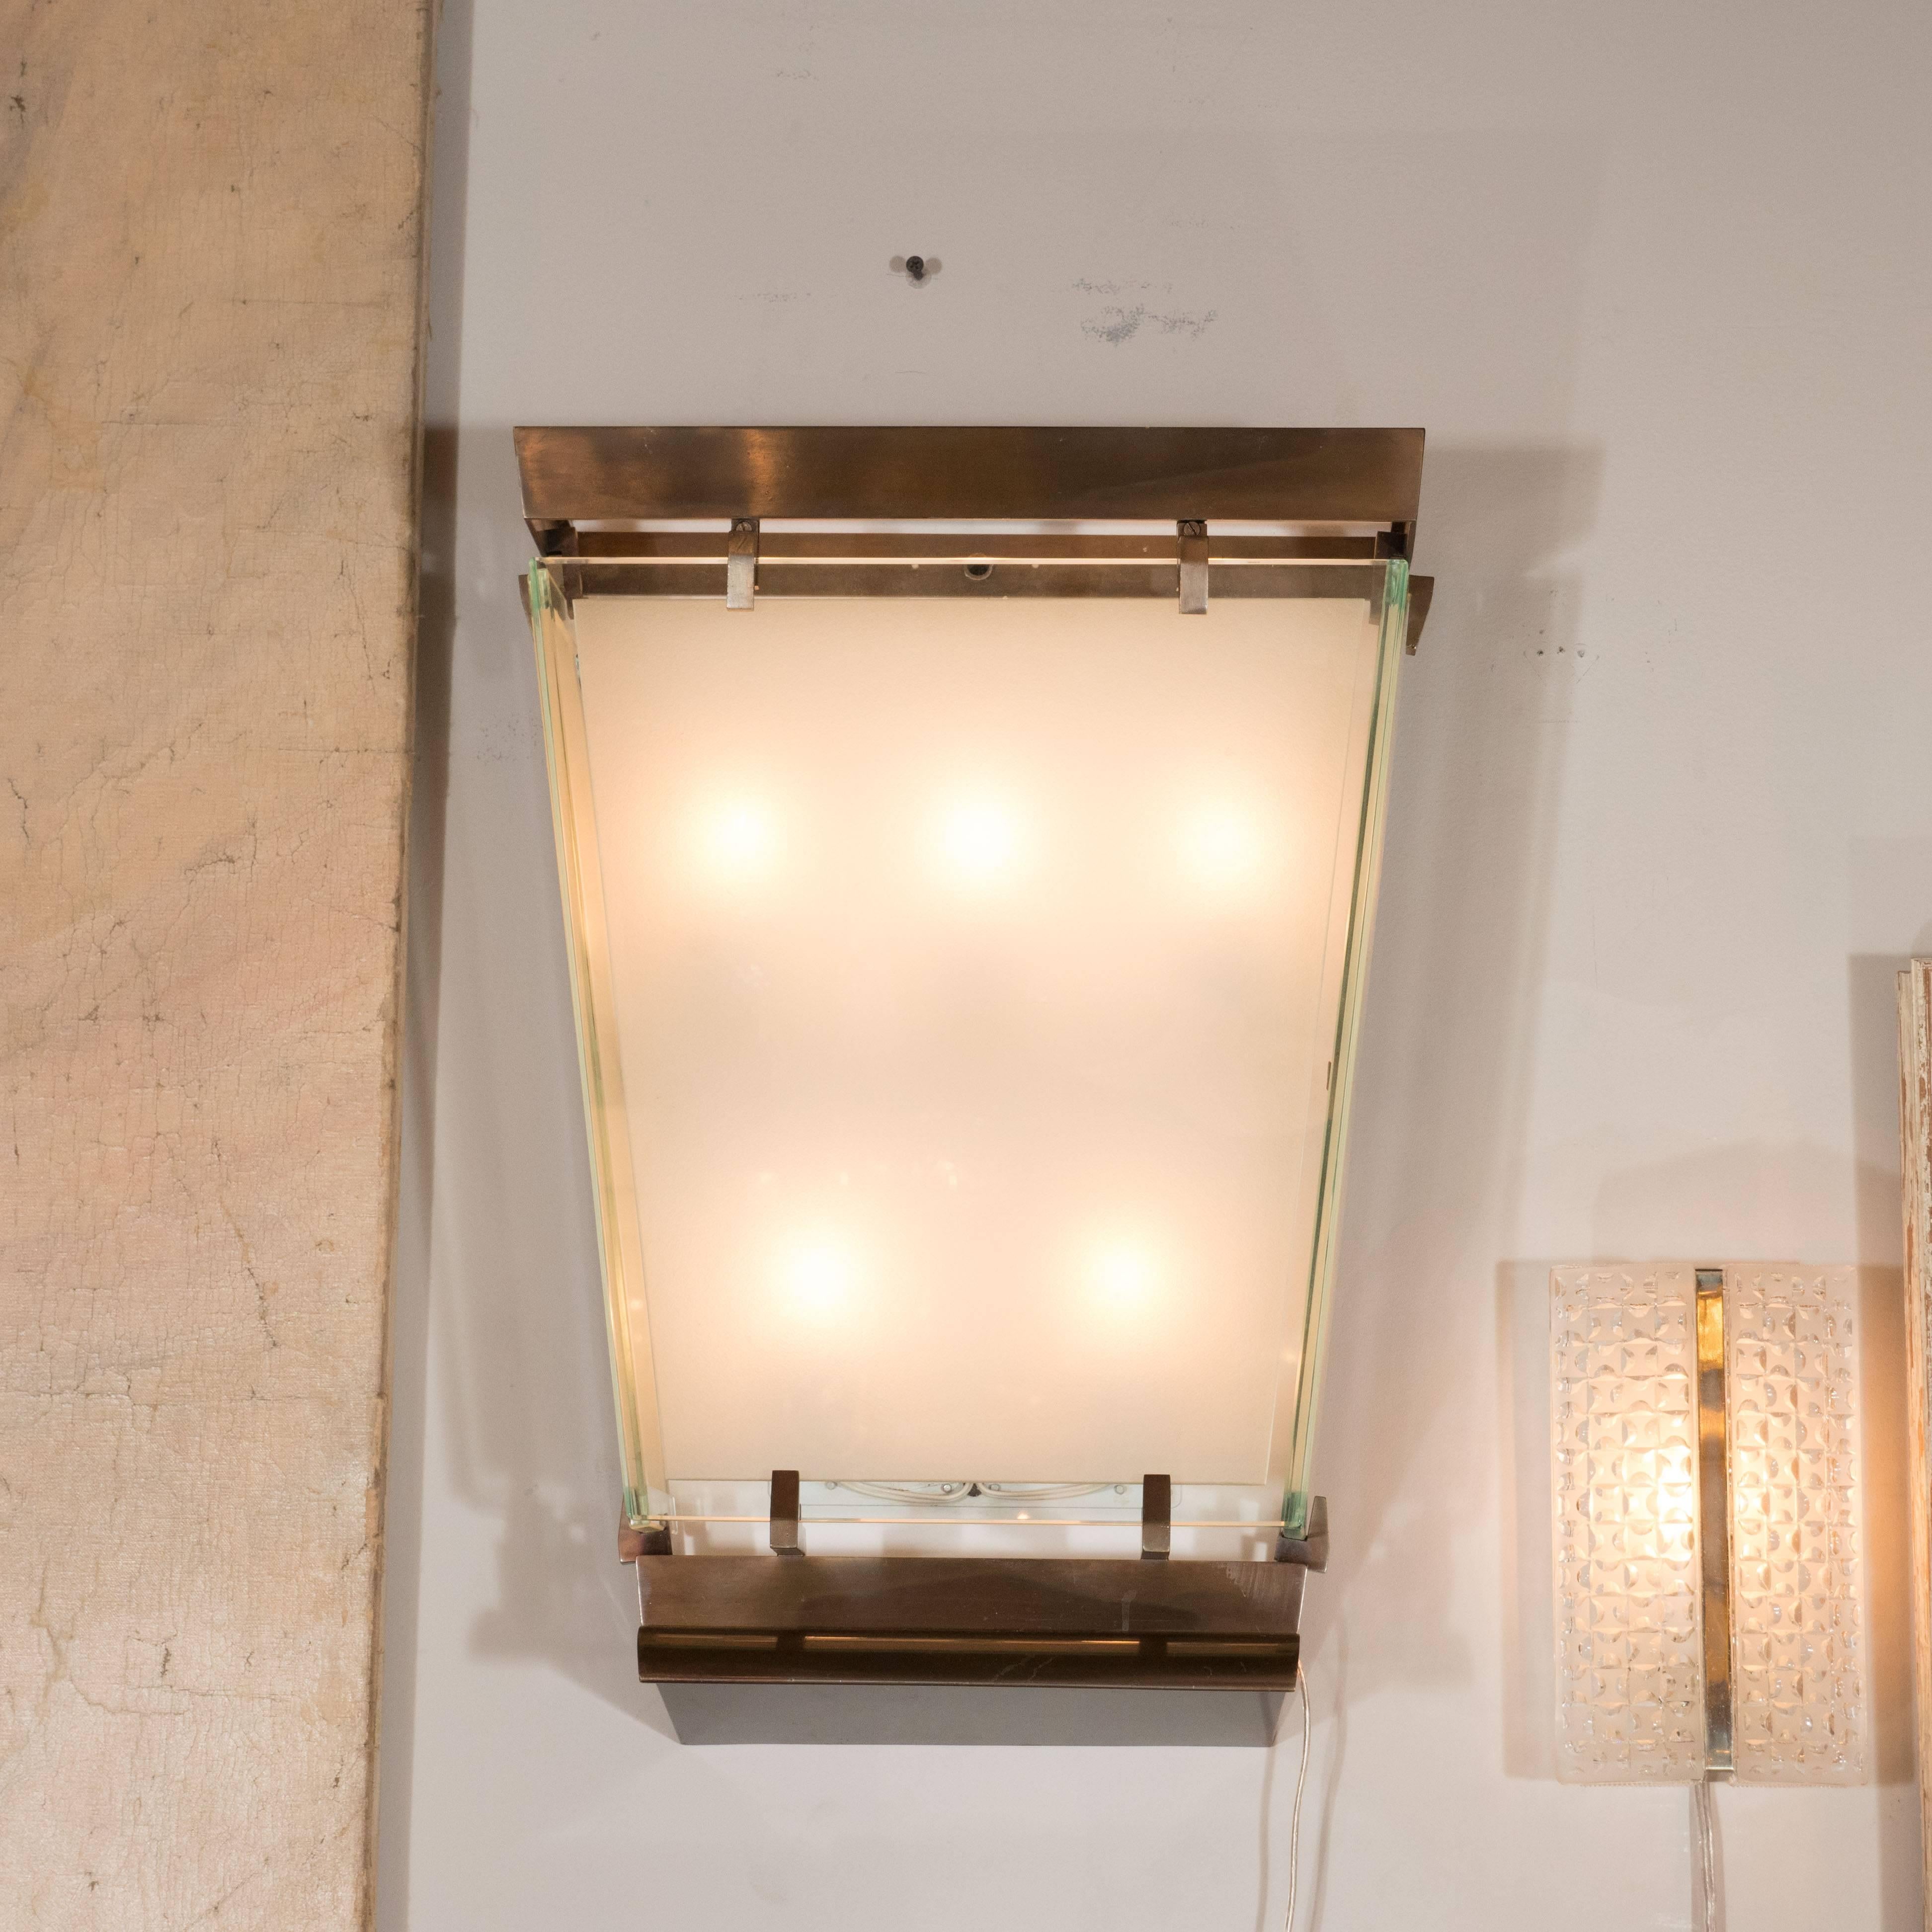 This stunning pair of Art Moderne sconces were realized in France, circa 1950. They feature rectilinear patinated brass frames with L-shaped supports in the same materials. In the centre of each sits a frosted glass frame with translucent borders